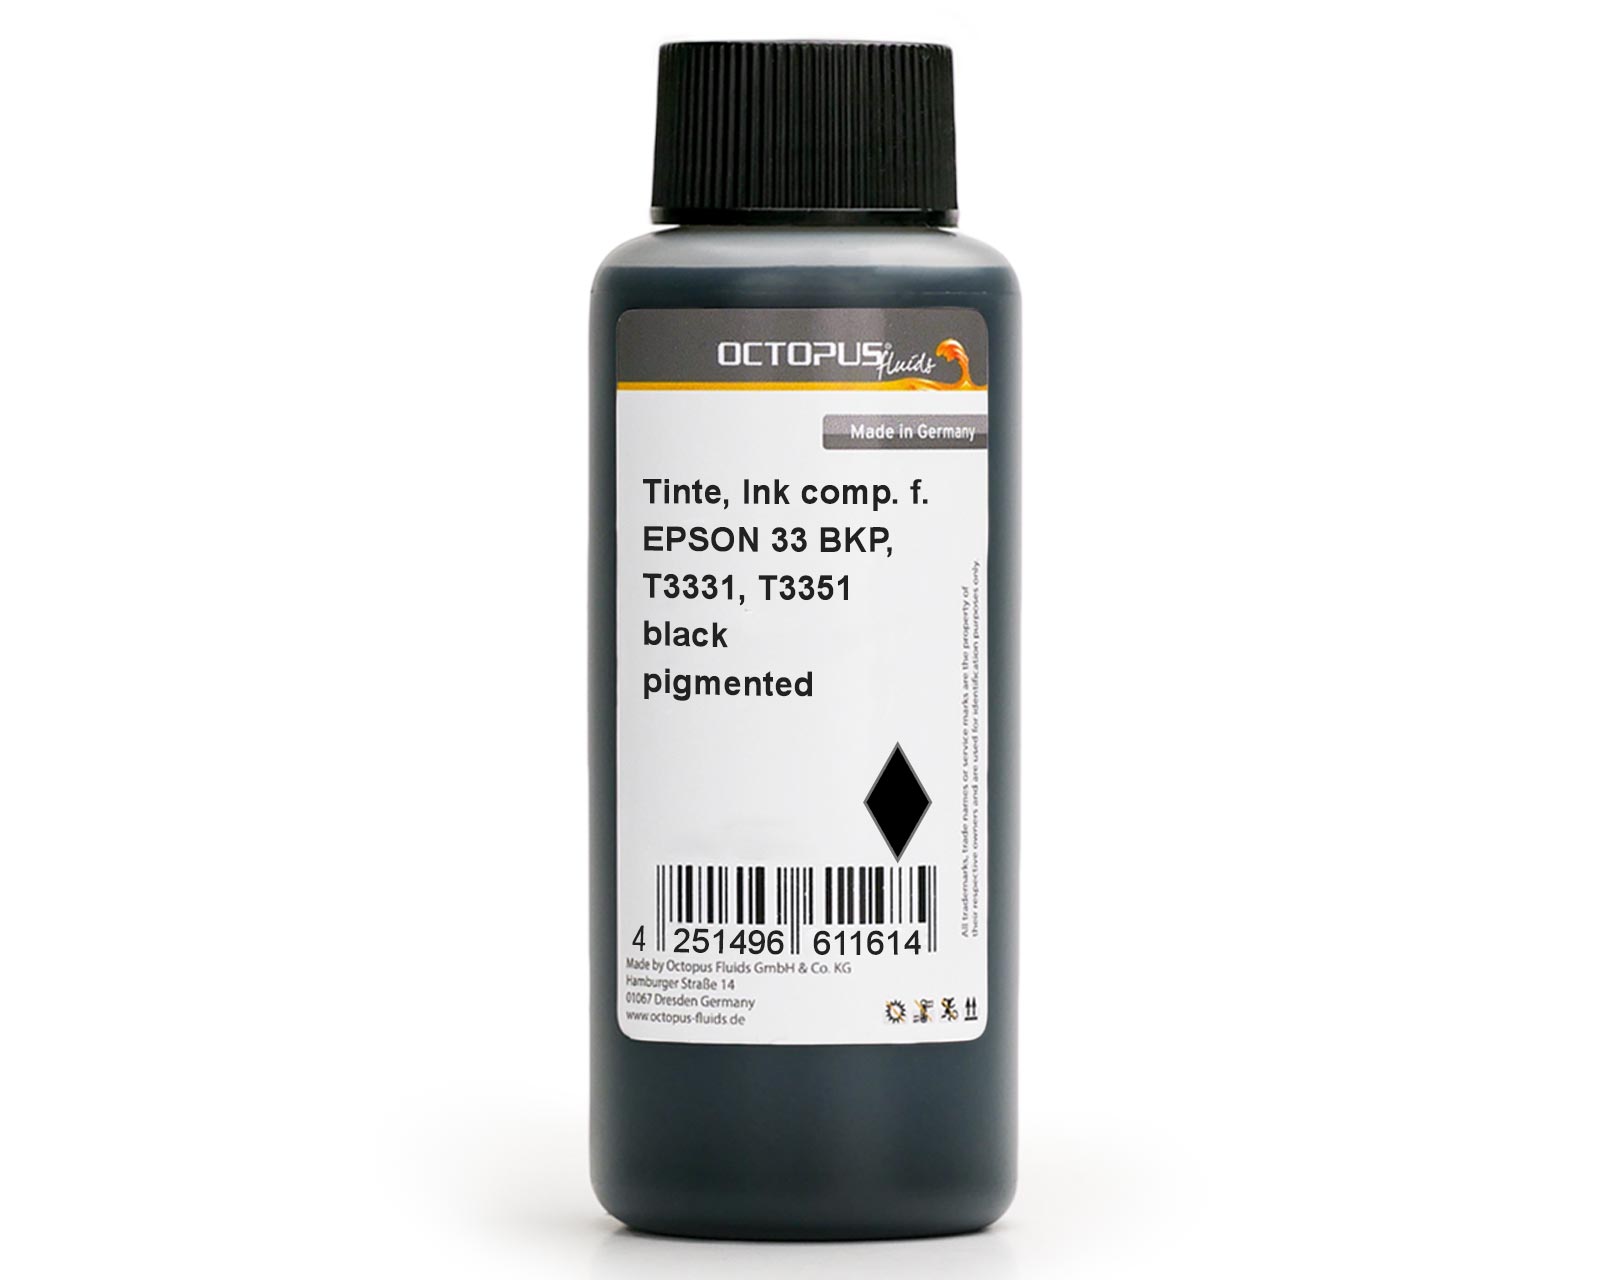 Refill ink for Epson 33, Expression Premium XP-530, XP-630, XP-830 a.o. black pigmented